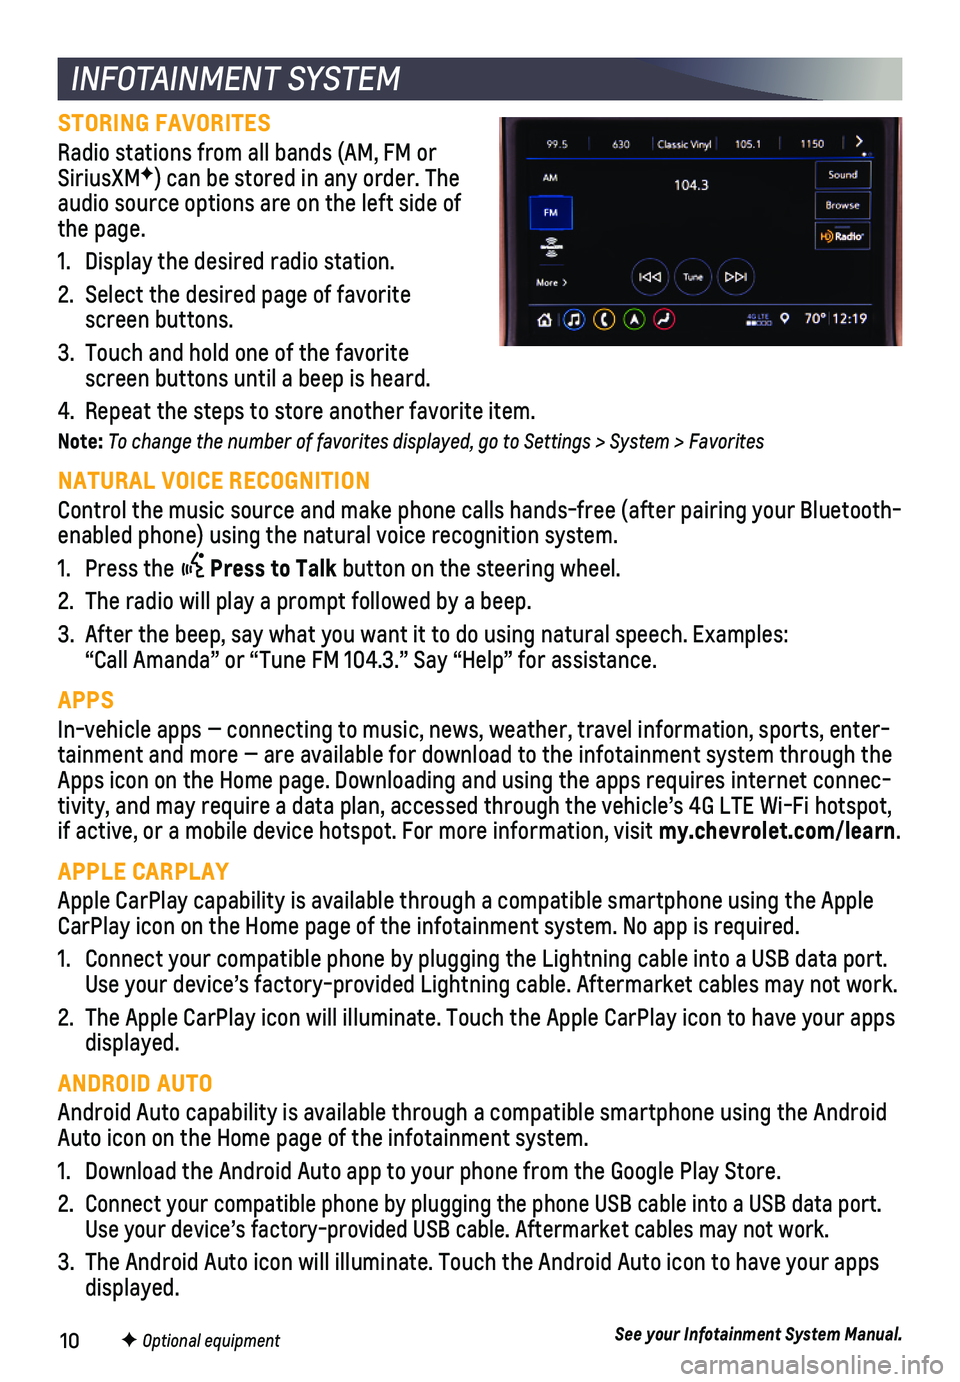 CHEVROLET SILVERADO 2019  Get To Know Guide 10F Optional equipment
INFOTAINMENT SYSTEM
STORING FAVORITES 
Radio stations from all bands (AM, FM or SiriusXMF) can be stored in any order. The audio source options are on the left side of the page.